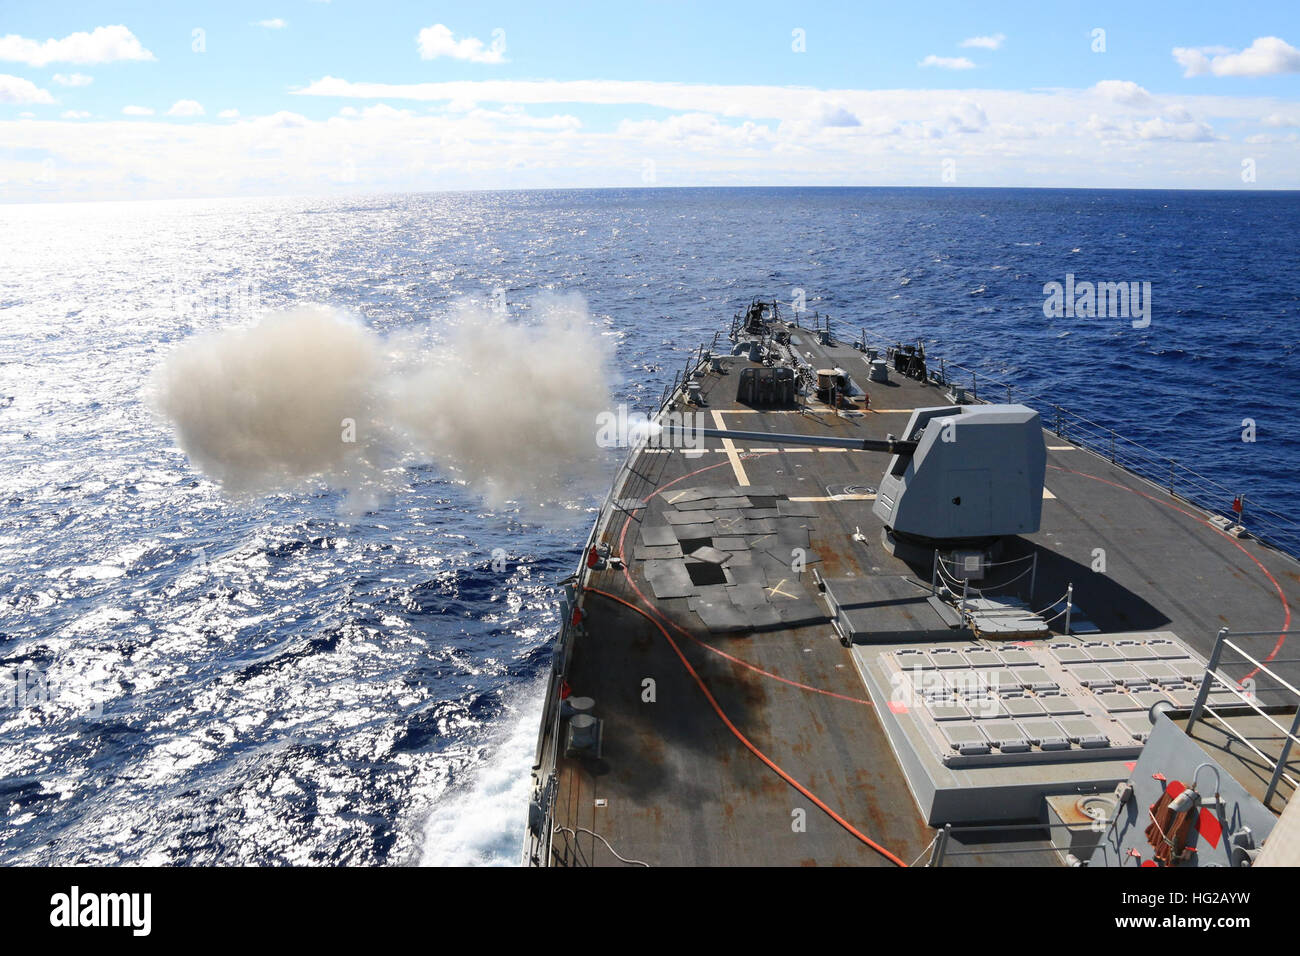 PHILIPPINE SEA (Jan. 17, 2016) The Arleigh Burke-class guided missile destroyer USS McCampbell (DDG 85) fires a MK 45 5-inch gun during a live-fire exercise. McCampbell is on patrol in the 7th Fleet area of operation in support of security and stability in the Indo-Asia-Pacific region. (U.S. Navy photo by ENS Soon Kwon, USN/Released)160117-N-JU970-863 Join the conversation: http://www.navy.mil/viewGallery.asp http://www.facebook.com/USNavy http://www.twitter.com/USNavy http://navylive.dodlive.mil http://pinterest.com https://plus.google.com USS McCampbell conducts a live-fire exercise. (238731 Stock Photo